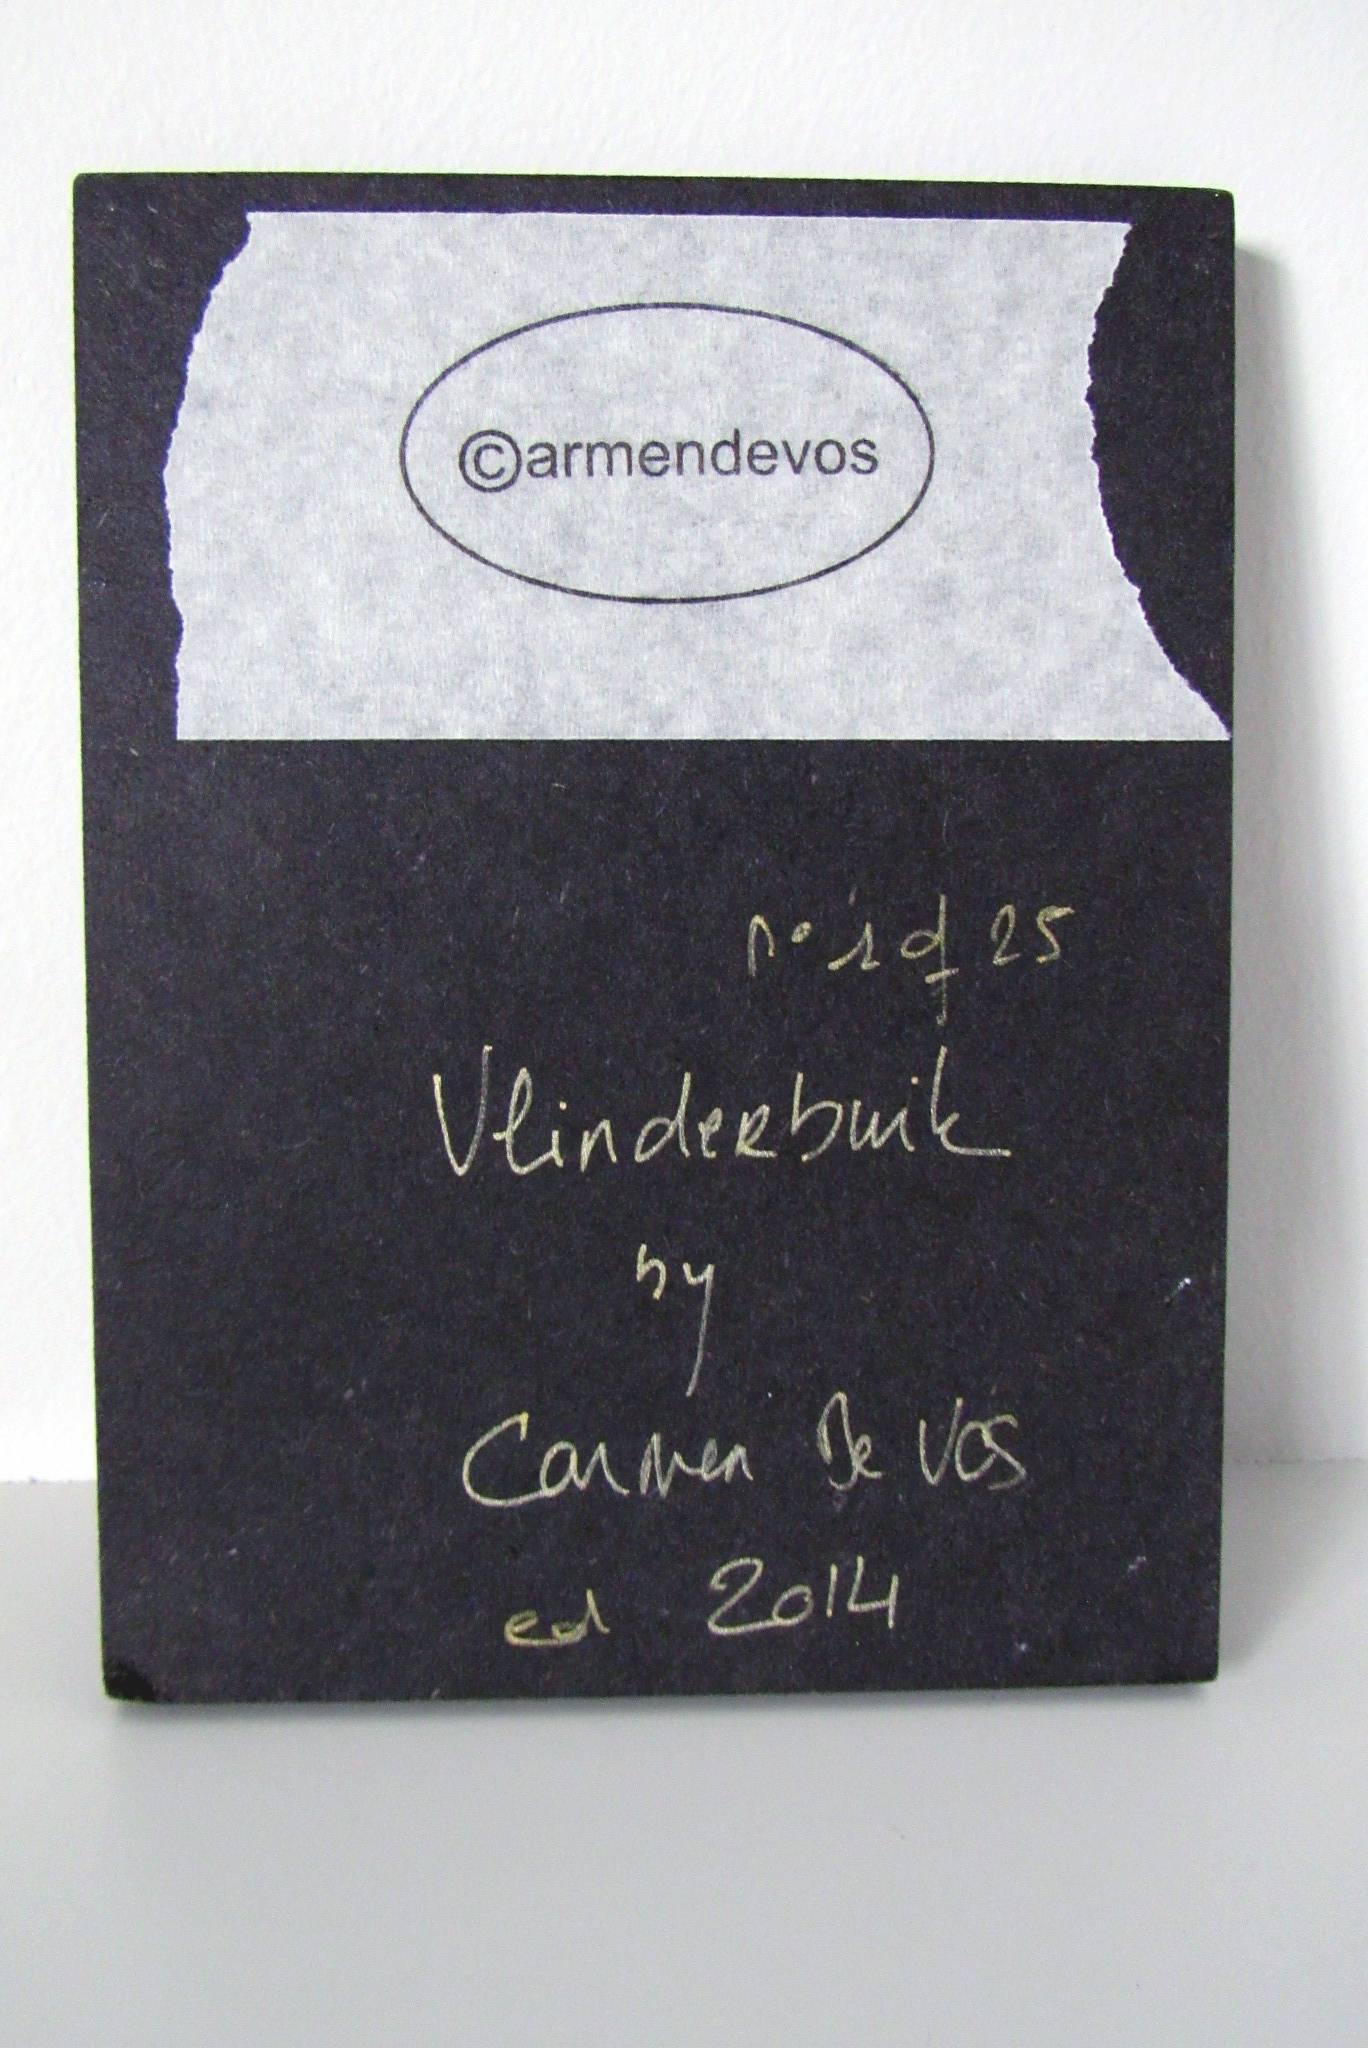 'Vlinderbuik (Odd Stories) - 1/25, 2013, digital print, based on a Poalroid, mounted on black mdf, matte coating, dimensions 15x11,3cm, hand signed by the artist on the back.

-- Part of Carmen De Vos' solo show Odd Stories in Bruges 2014 in the